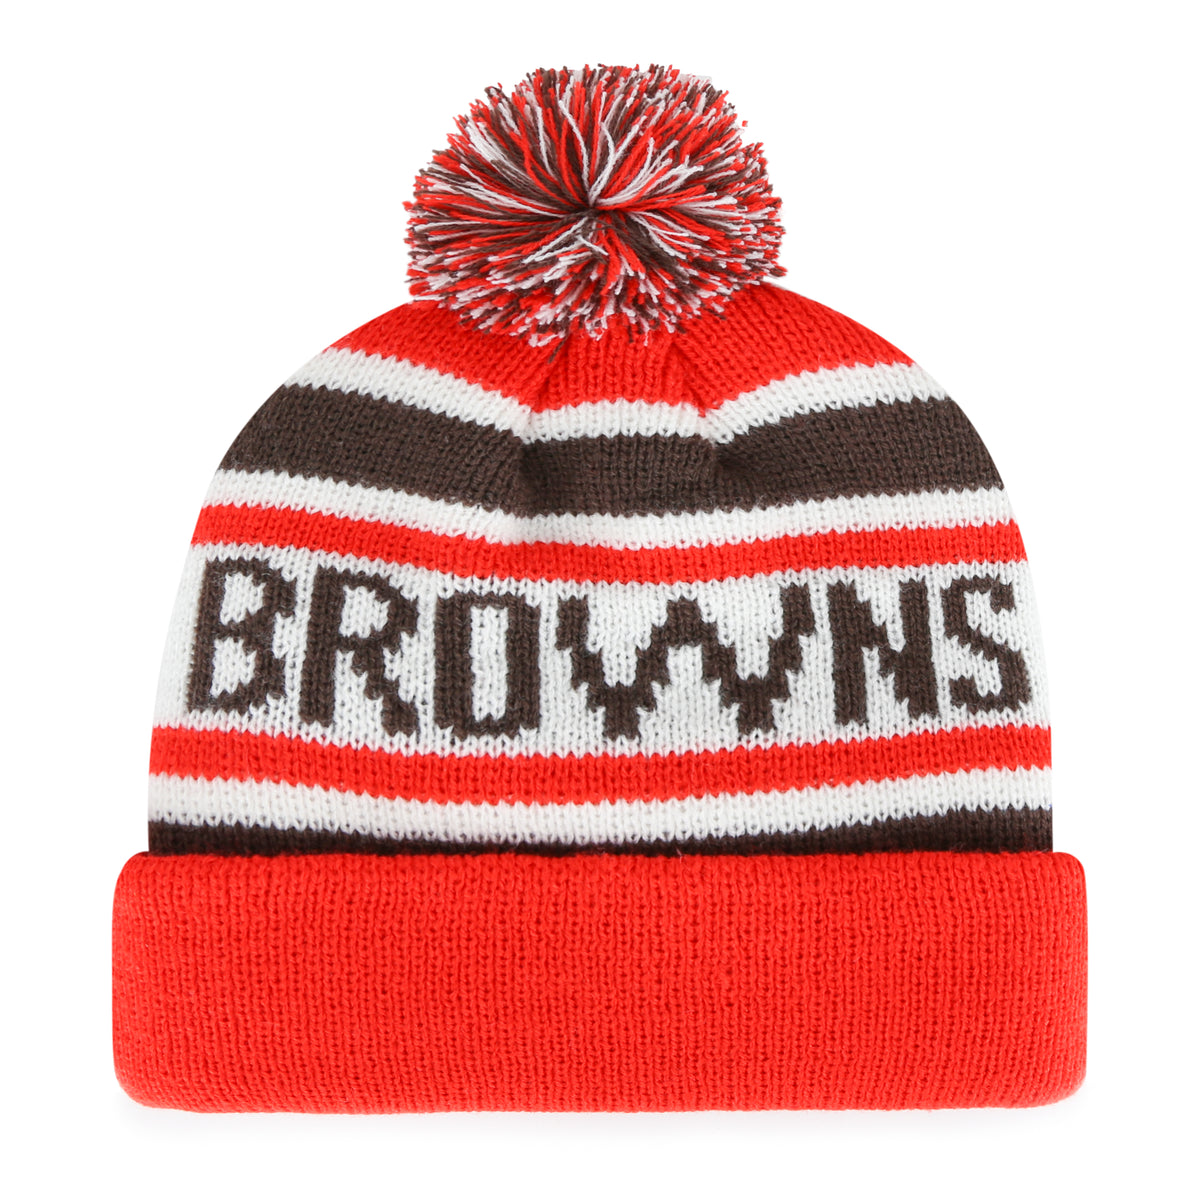 CLEVELAND BROWNS HANGTIME '47 CUFF KNIT YOUTH